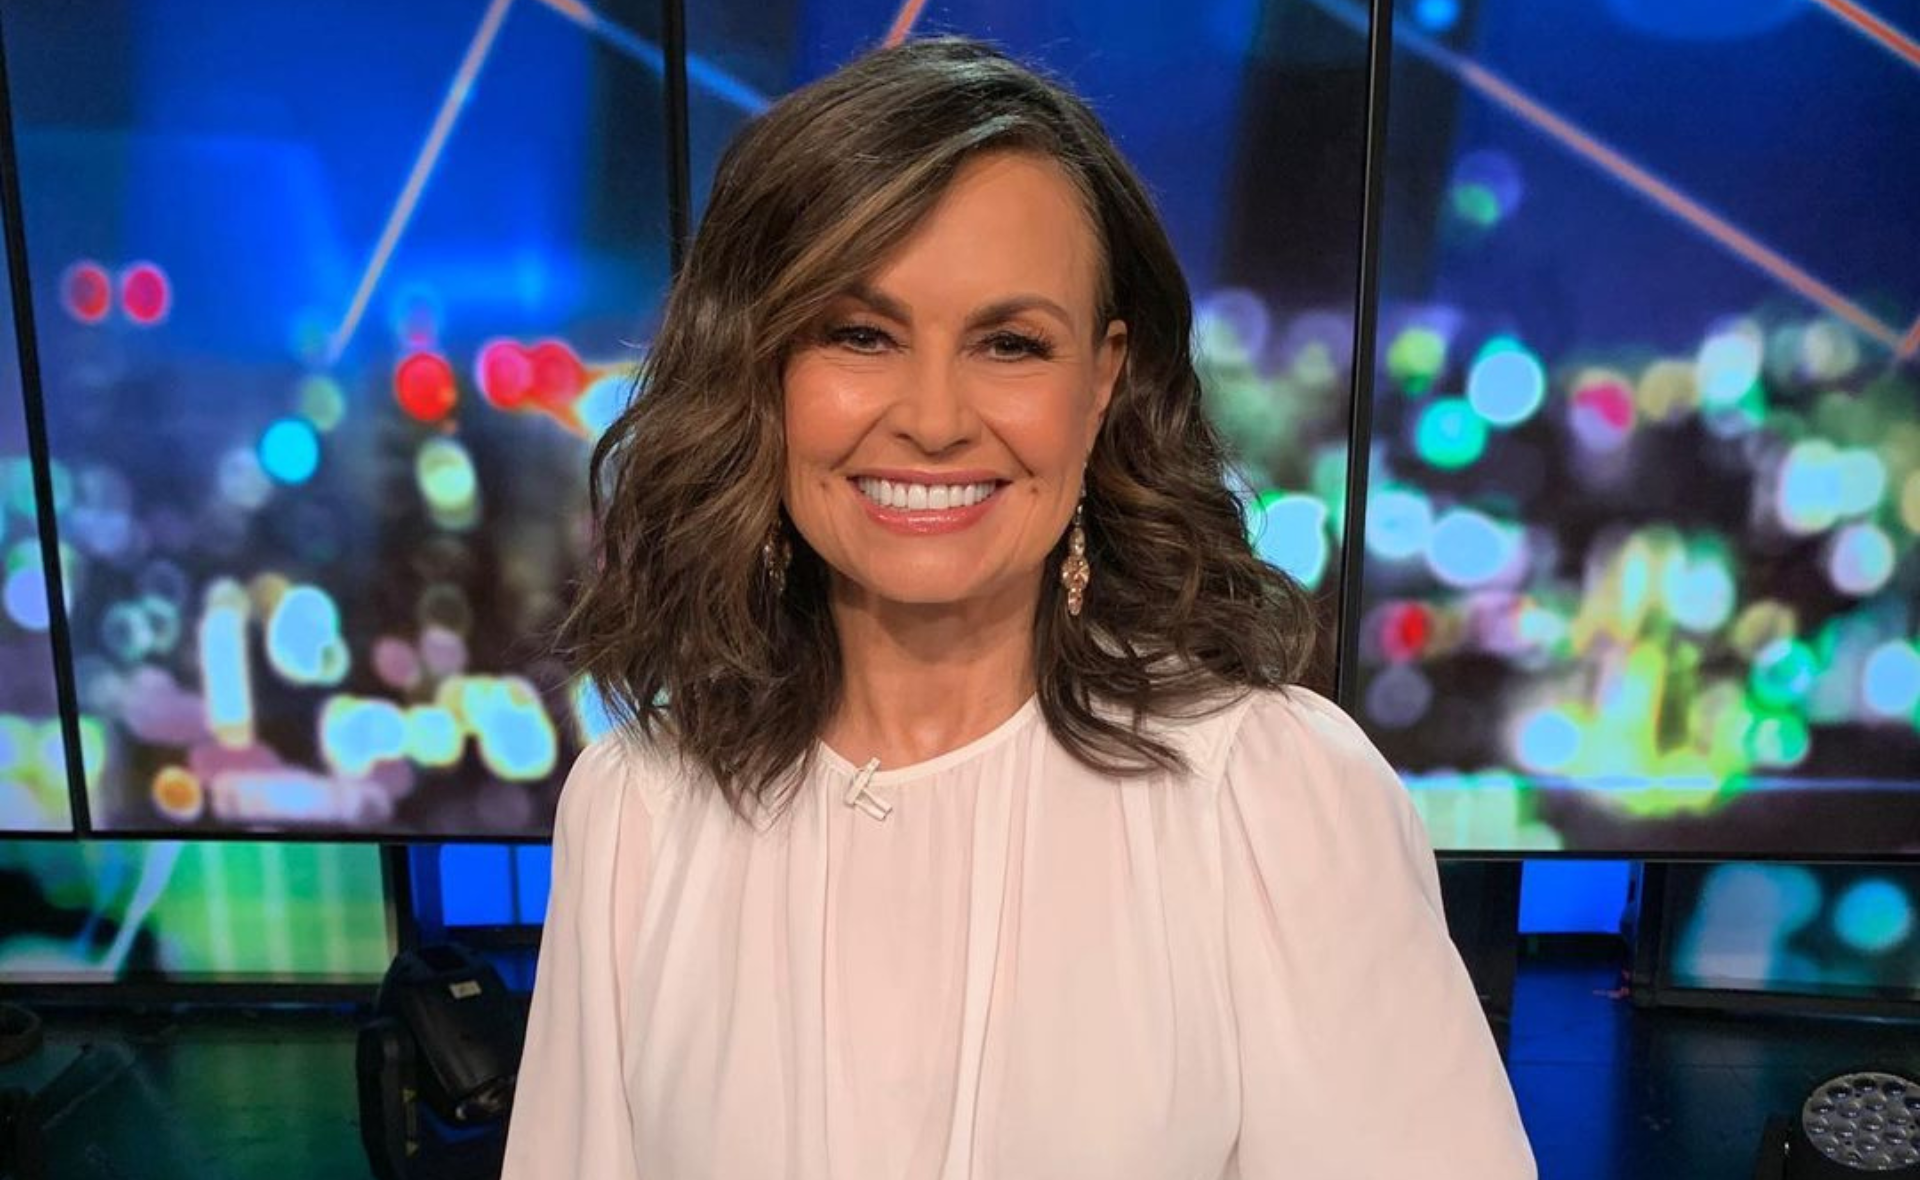 Lisa Wilkinson leaves The Project after the ‘toxic’ media environment has become too much